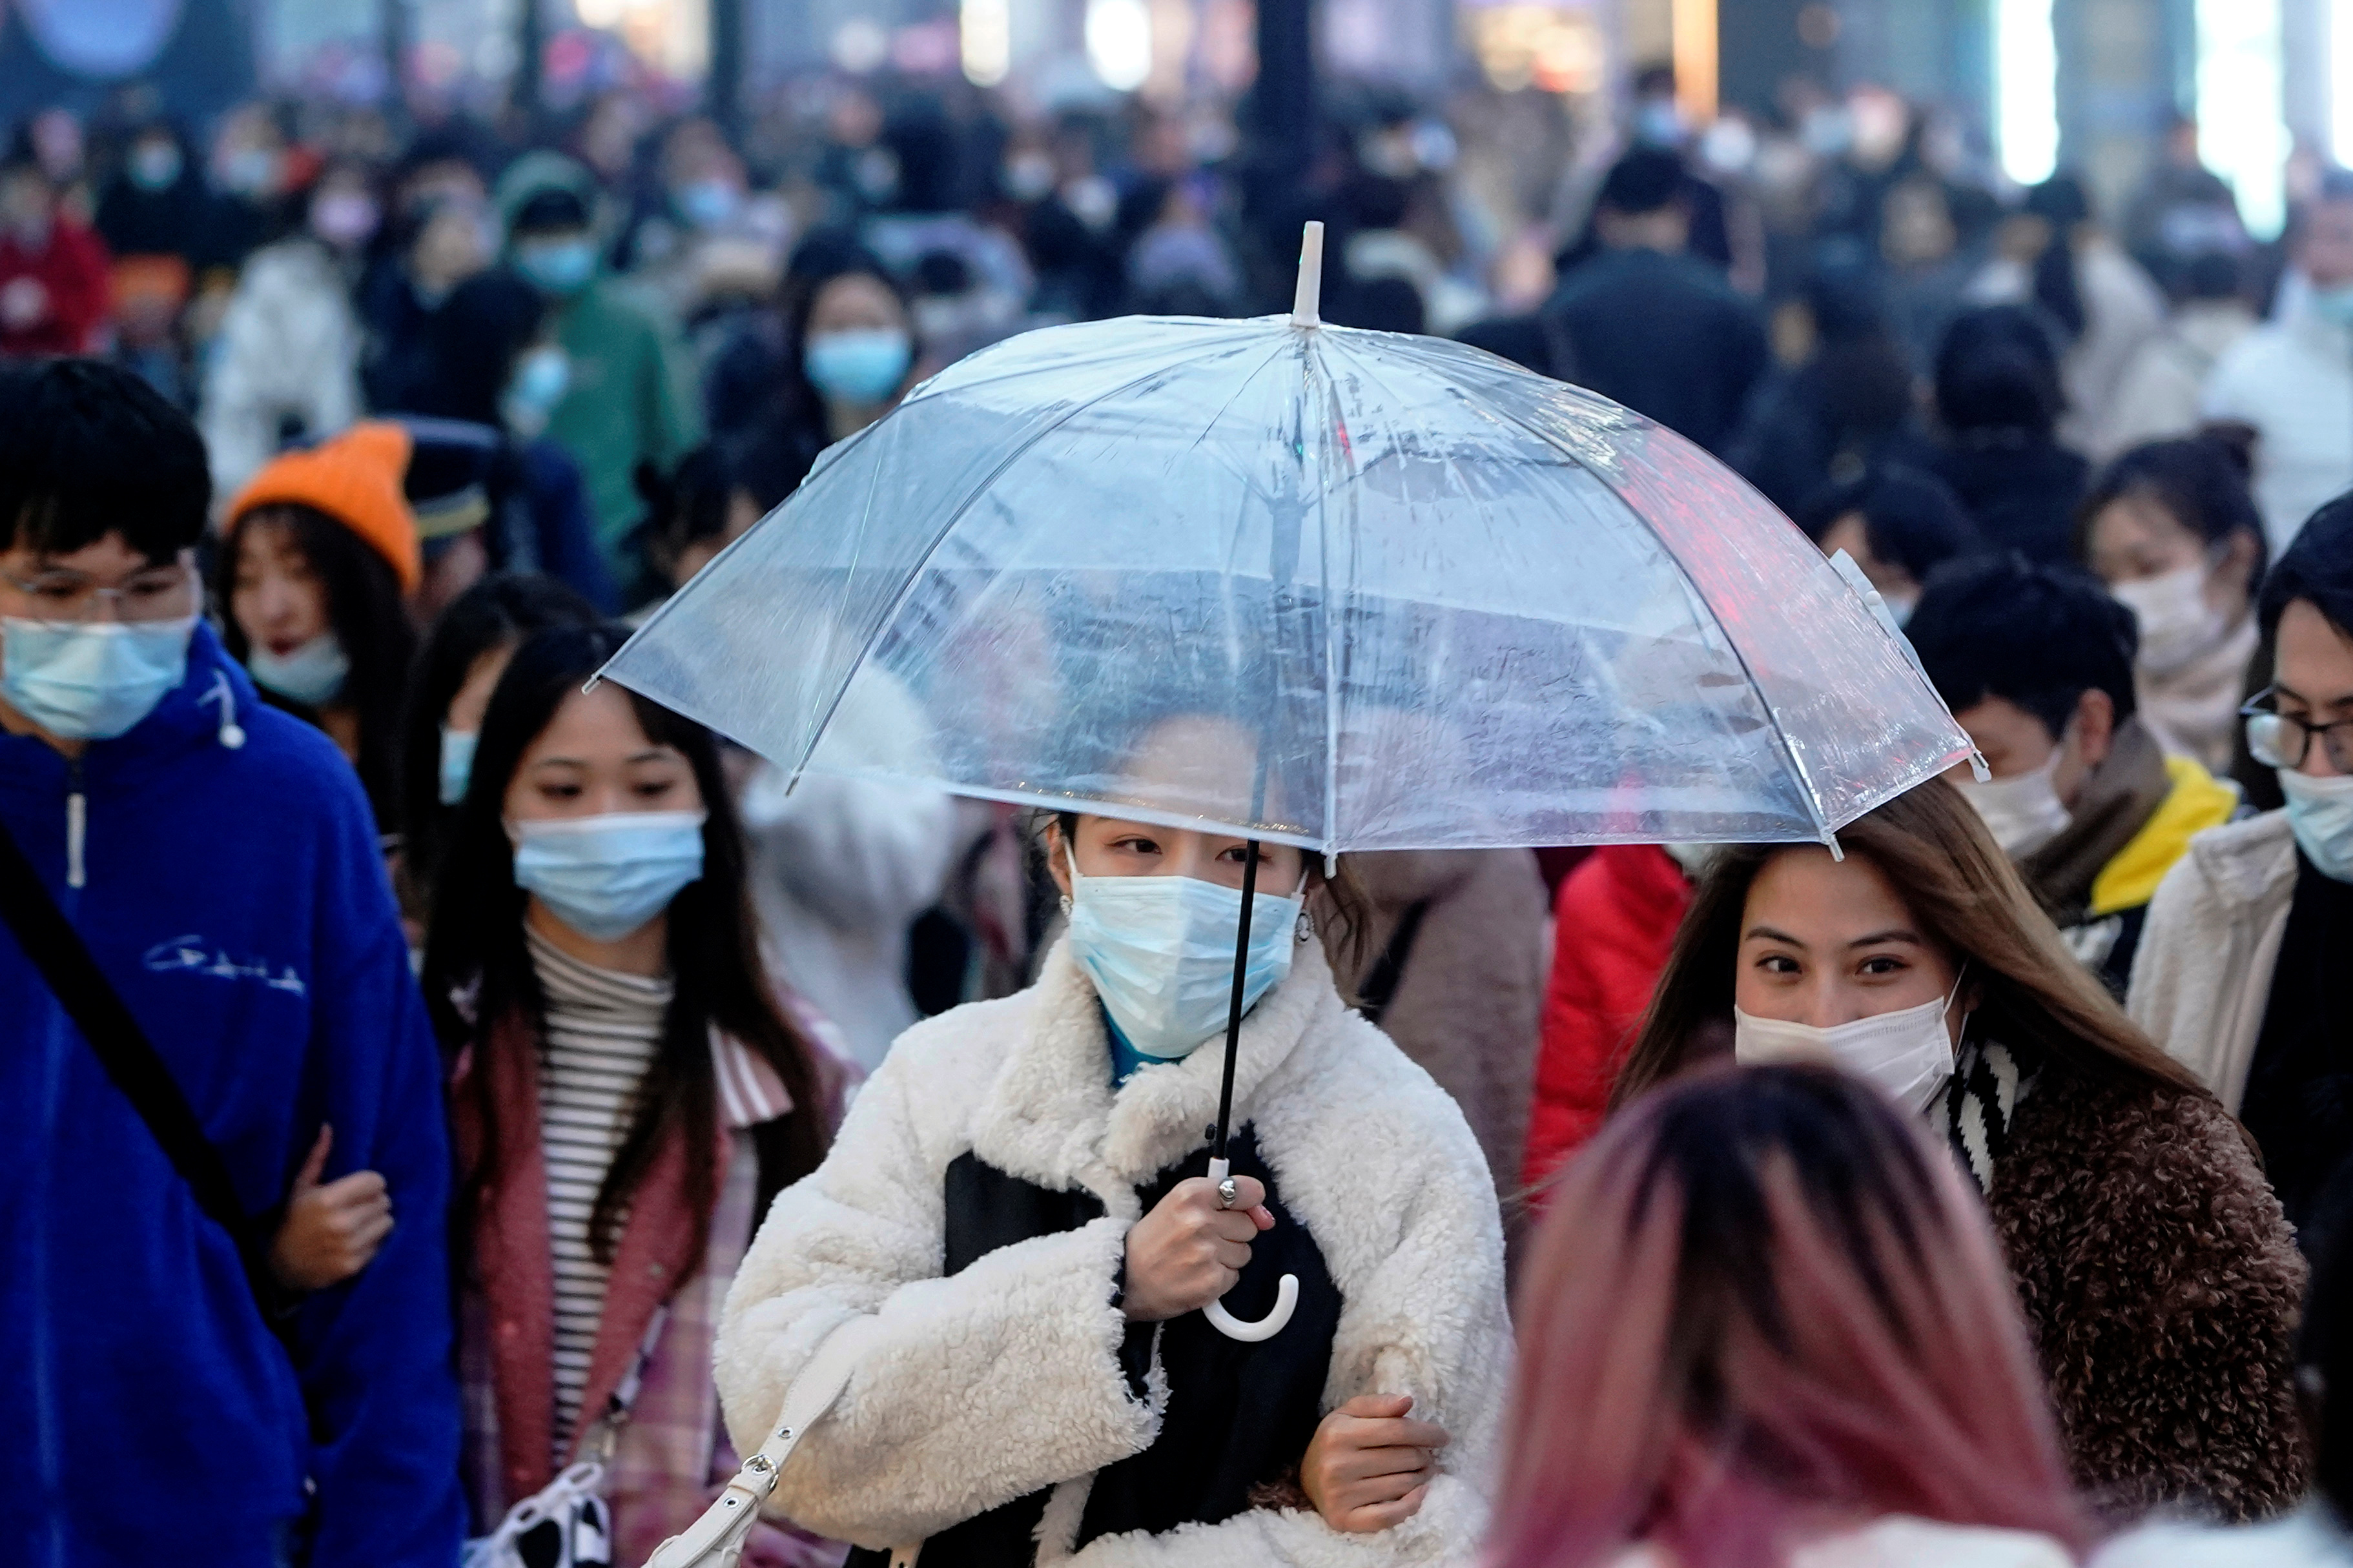 People wearing face masks are seen at a main shopping area almost a year after the global outbreak of the coronavirus disease (COVID-19) in Wuhan